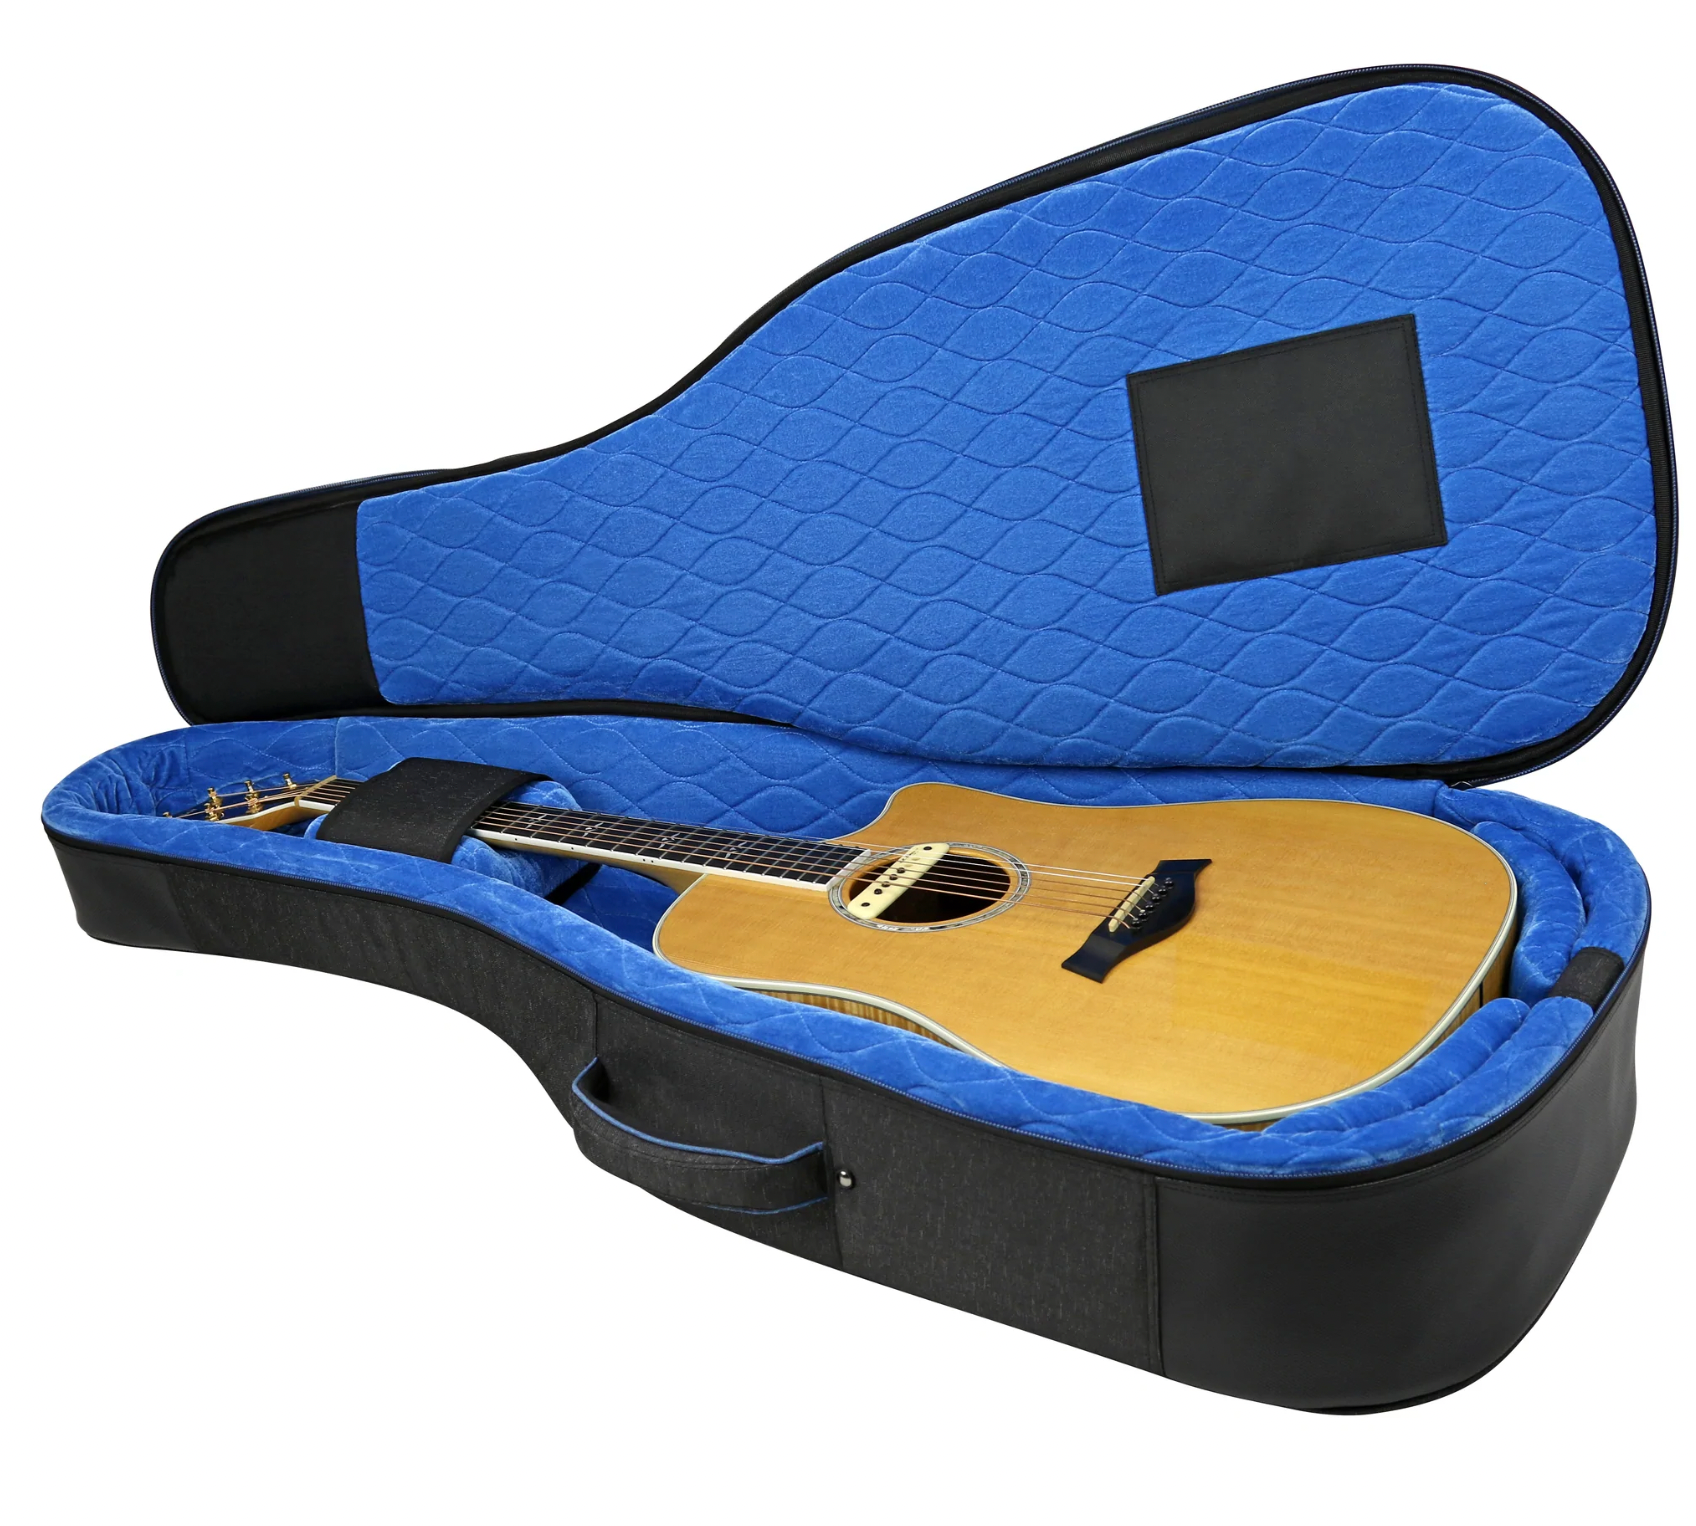 RB Continental Voyager Dreadnought Guitar Case